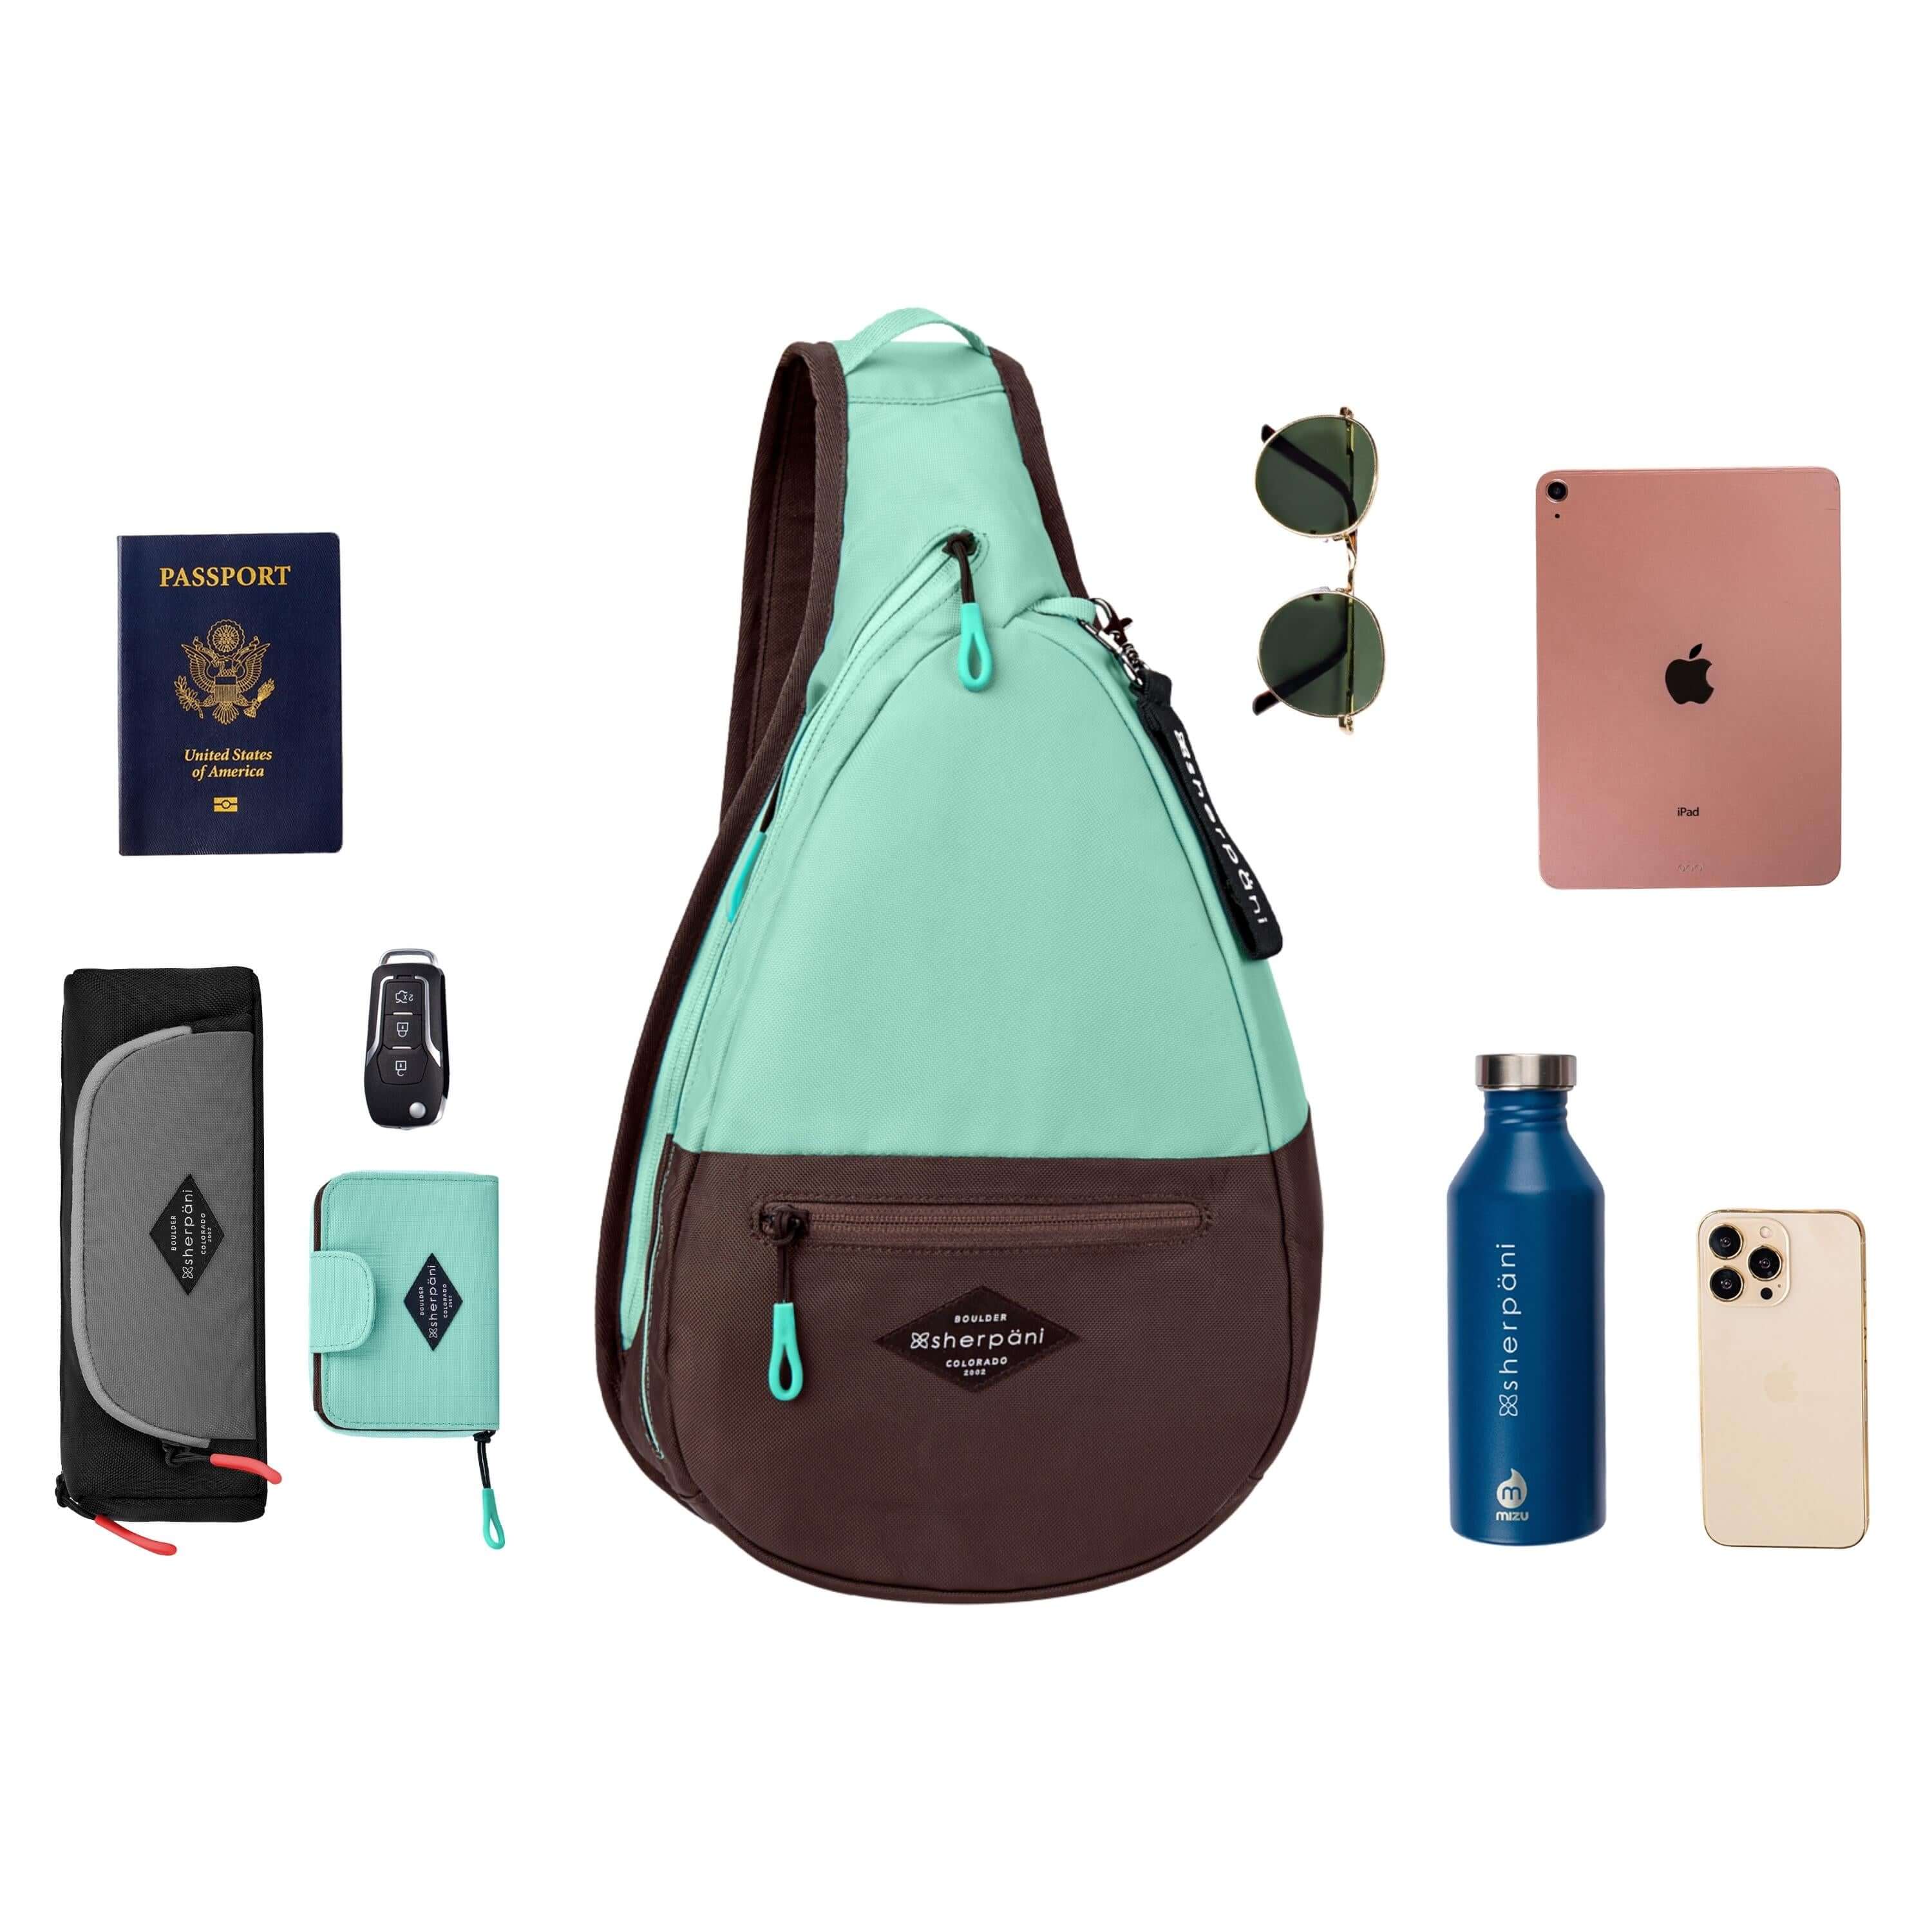 Top view of example items to fill the back. Sherpani's bag, the Esprit in Seagreen, lies in the center. It is surrounded by an assortment of items: passport, car key, sunglasses, tablet, water bottle, phone and Sherpani travel accessories the Poet in Stone and the Barcelona in Seagreen. 